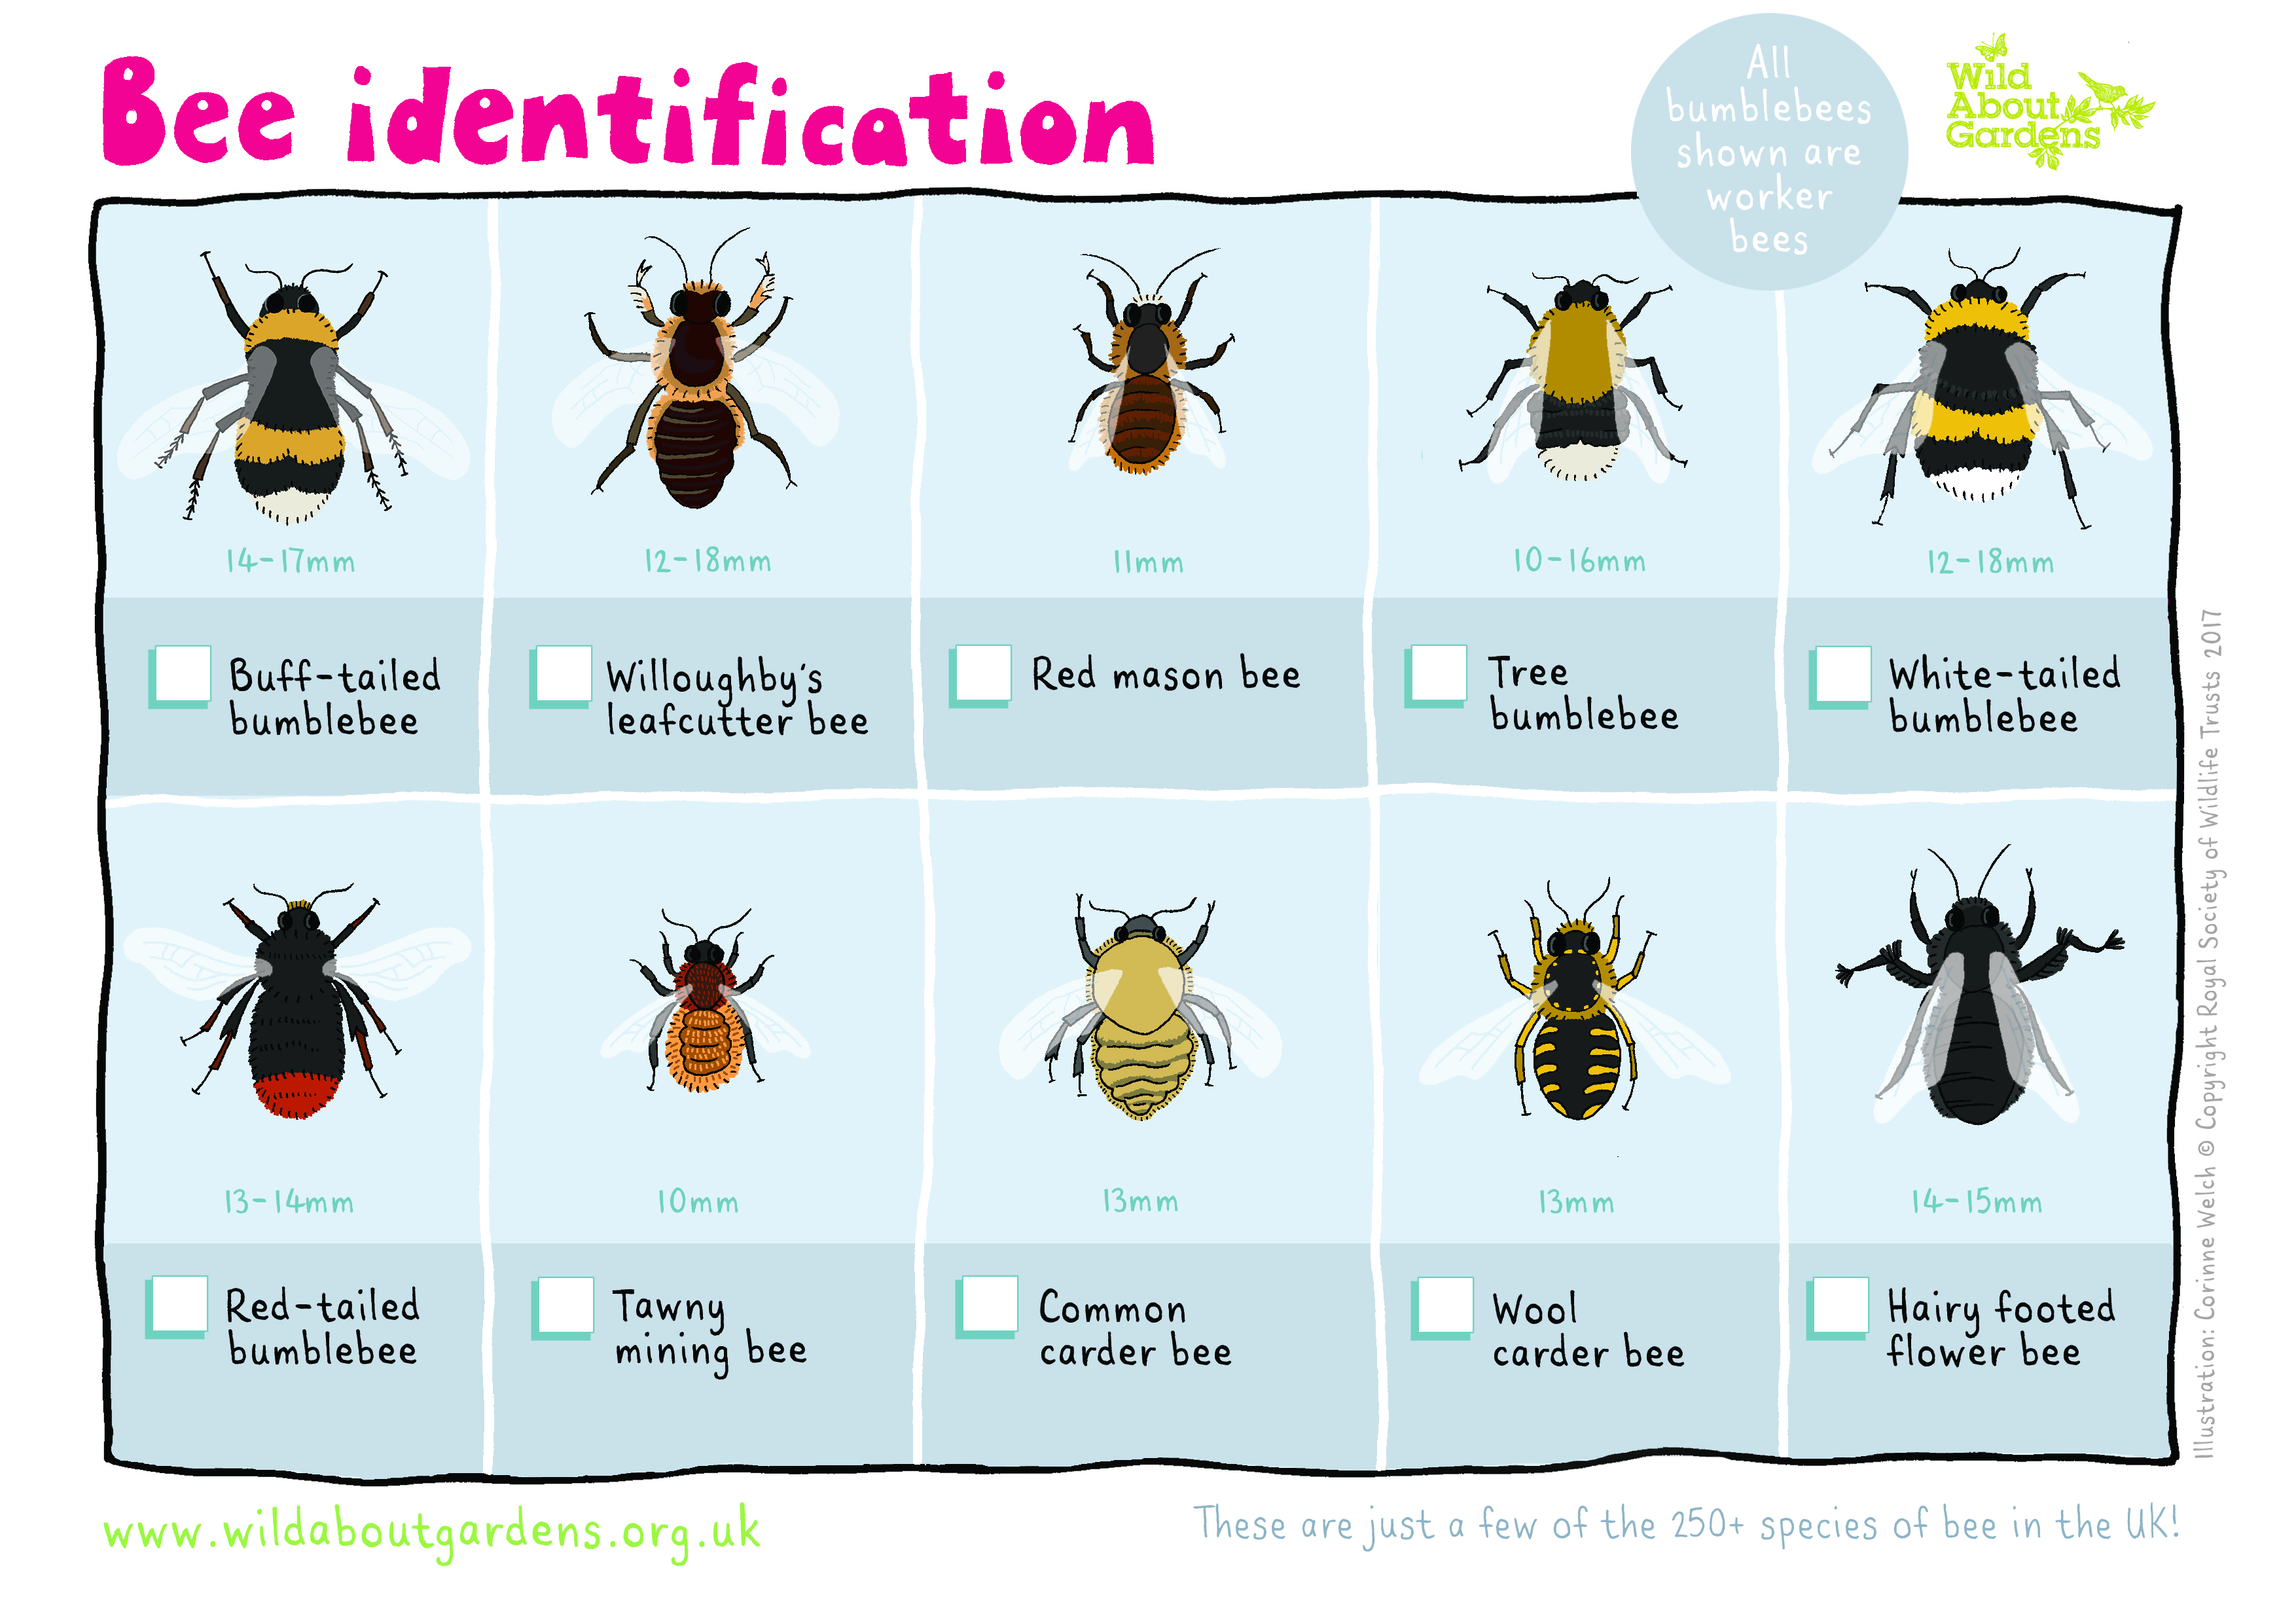 Stinging Insect Identification Chart